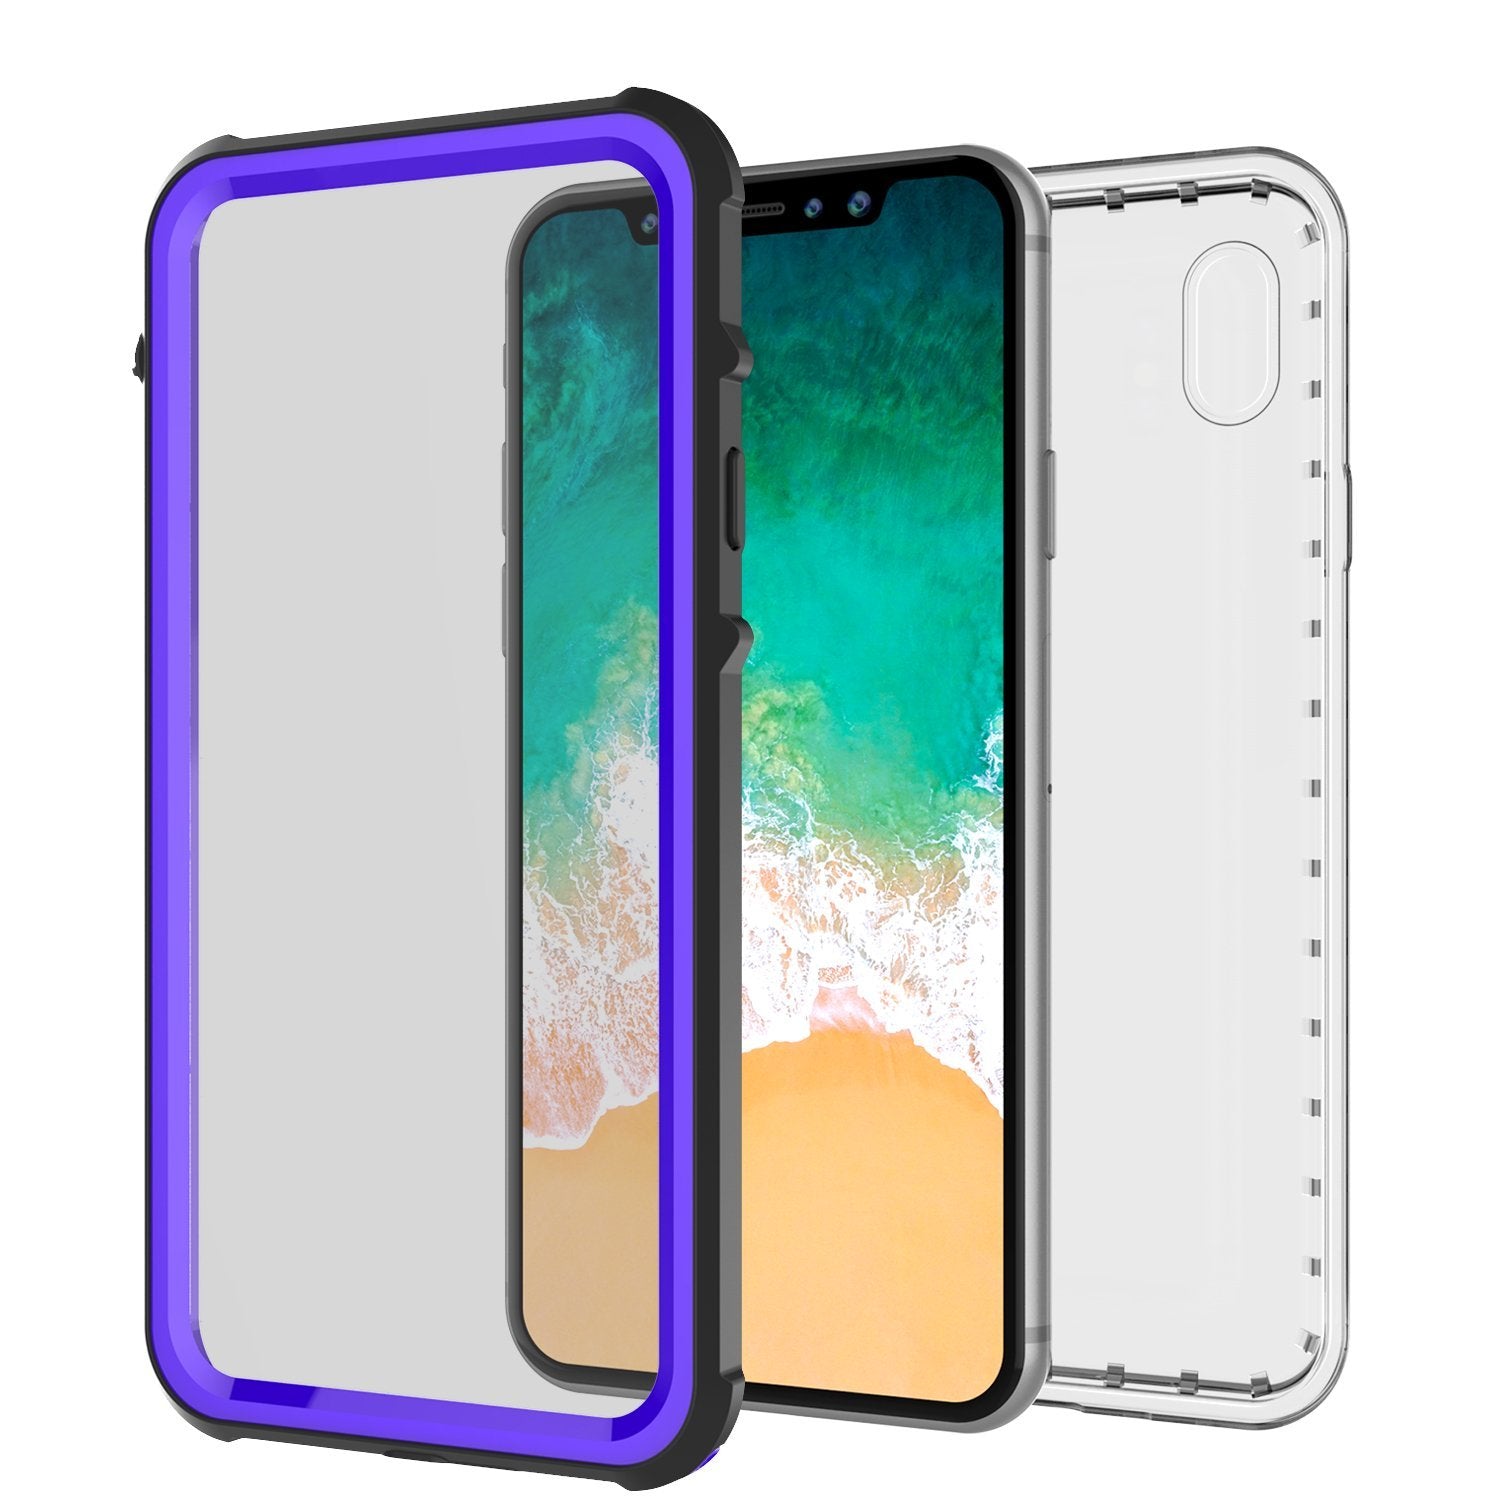 iPhone XS Case, PUNKCase [CRYSTAL SERIES] Protective IP68 Certified Cover [Purple]